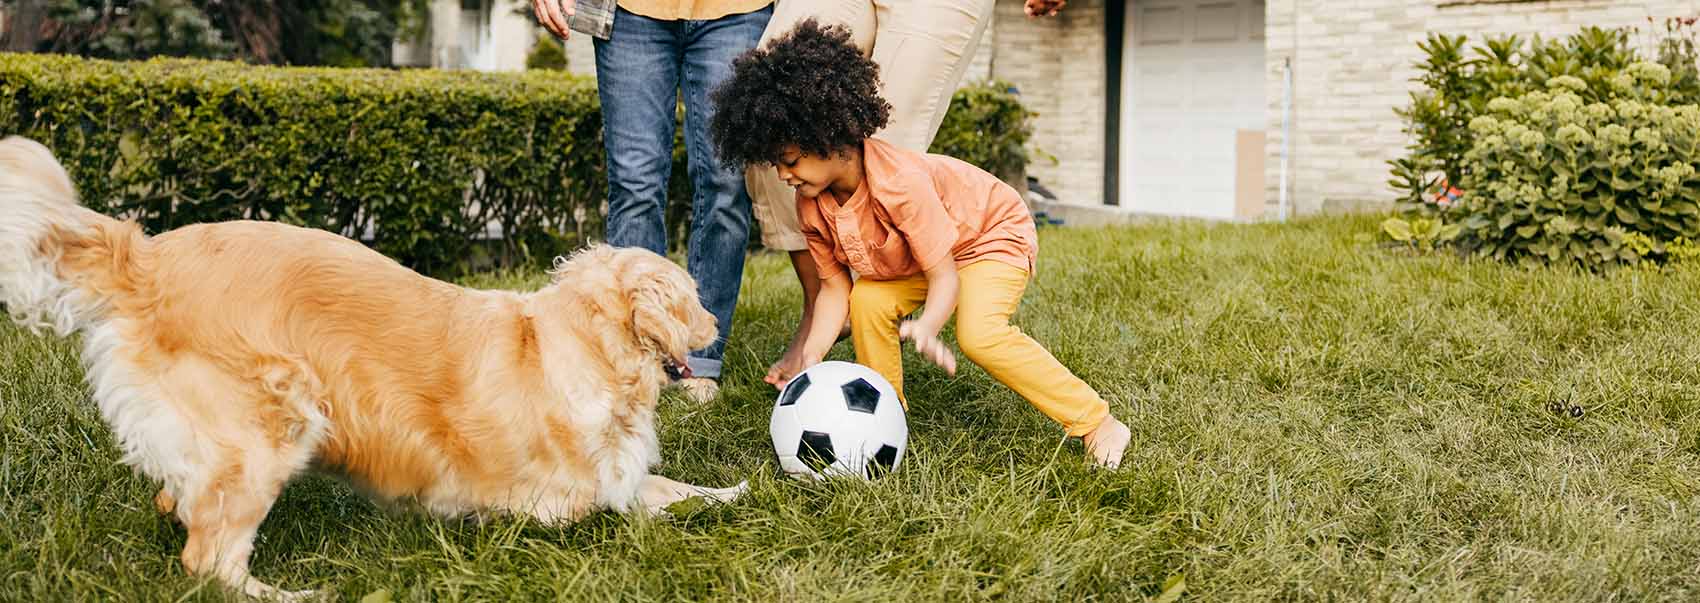 child playing soccer with golden retriever